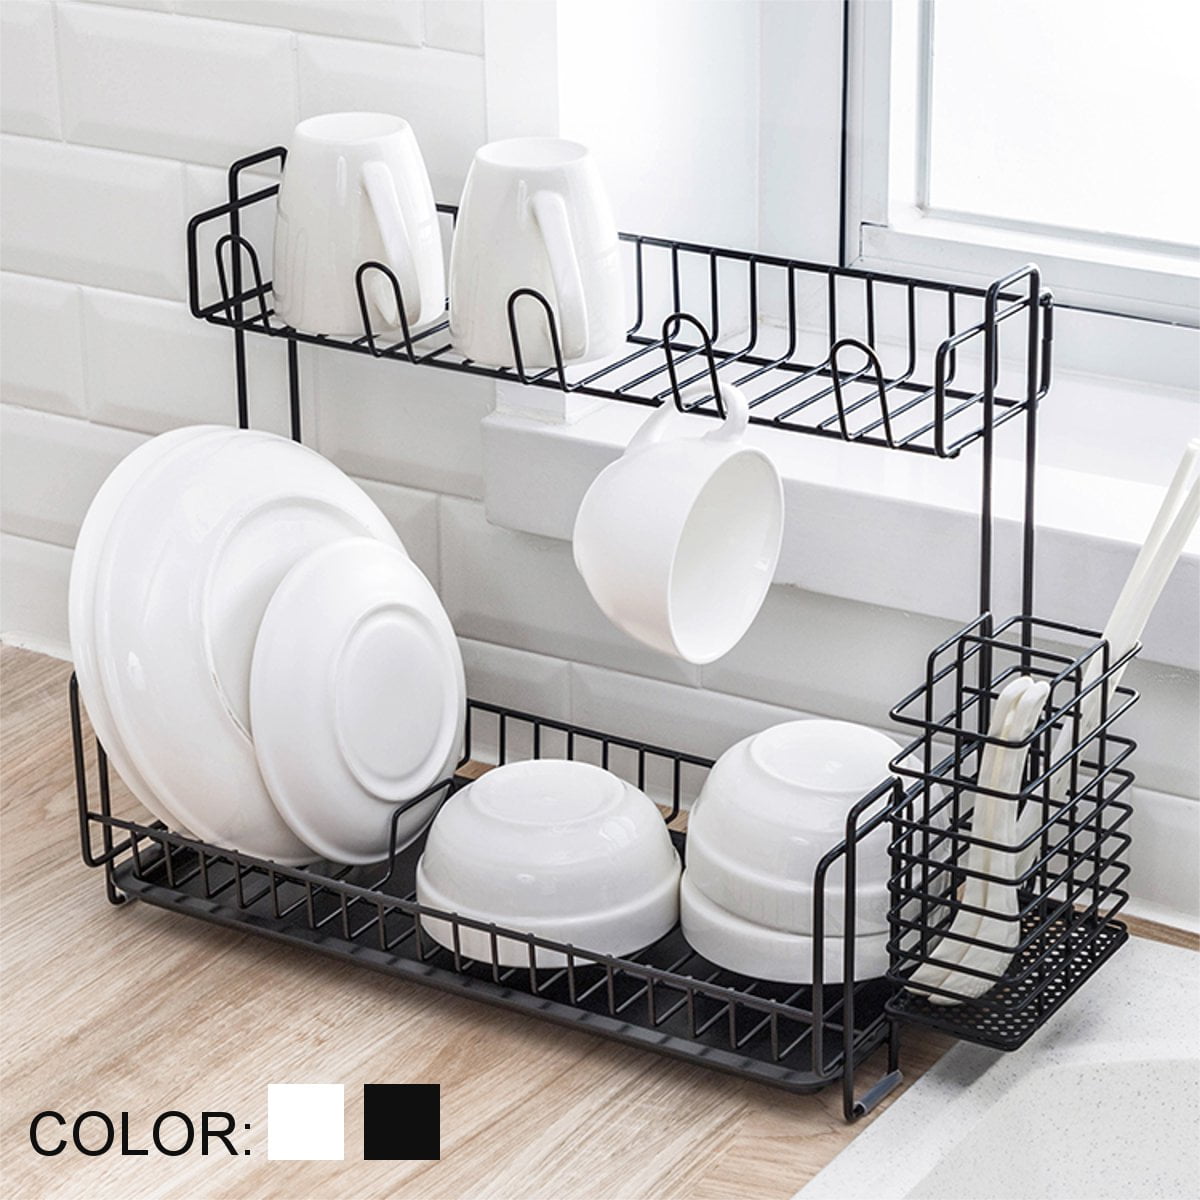 Featured image of post Large Black Dish Rack - Black dish rack with wood handles.